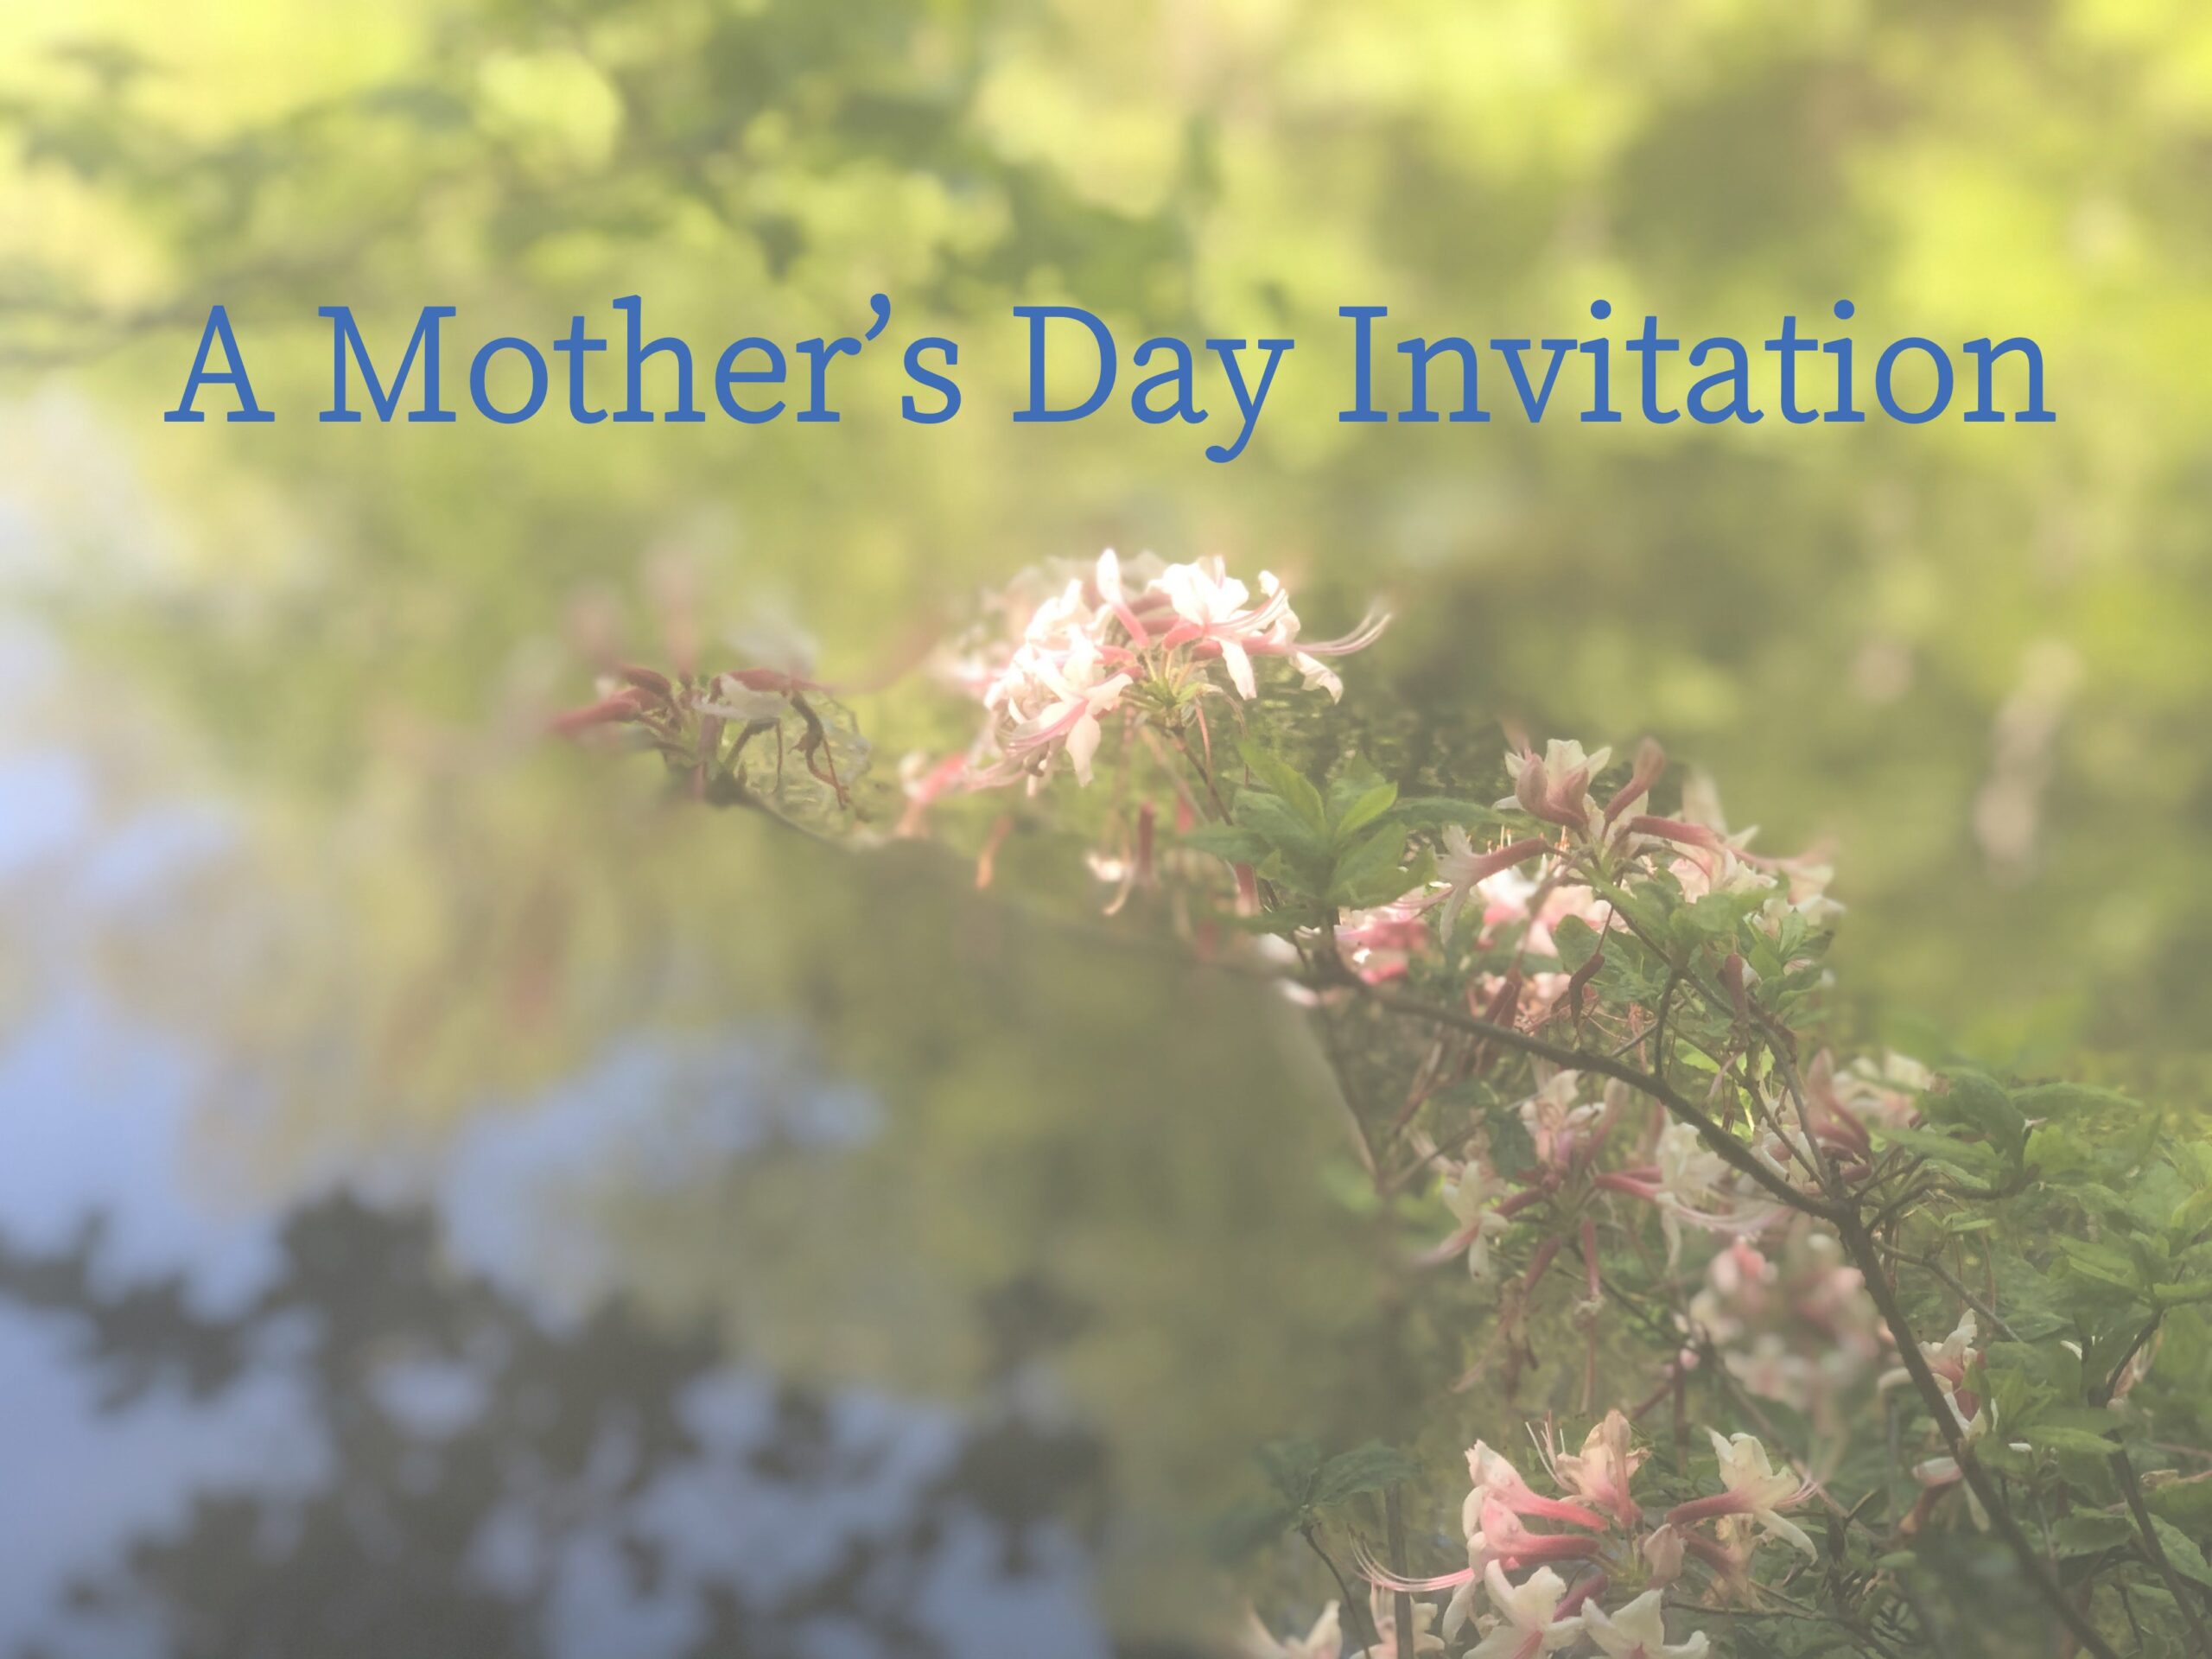 A Mother’s Day Invitation